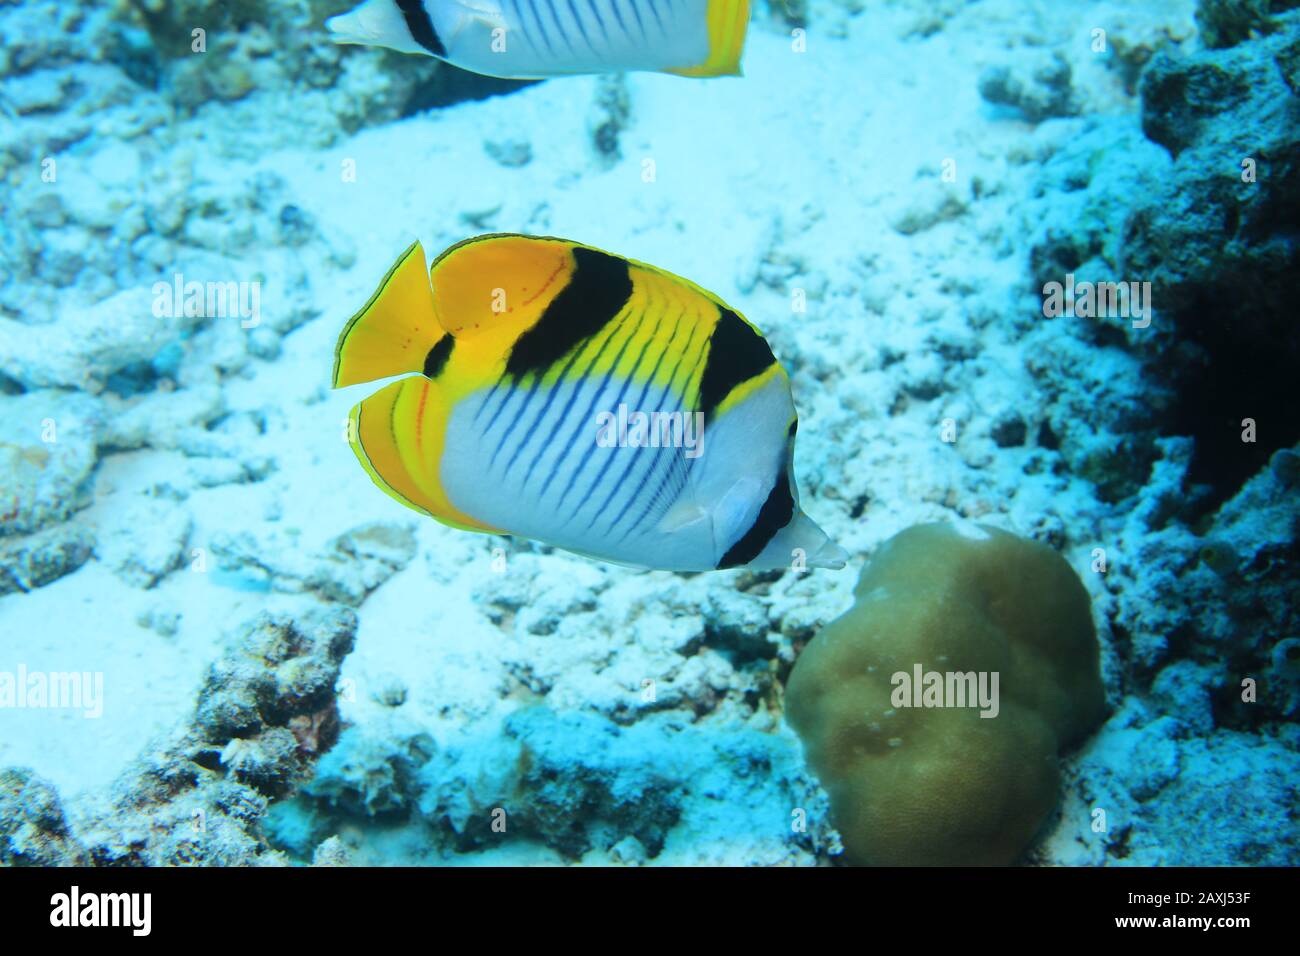 Blackwedged butterflyfish (Chaetodon falcula) underwater in the tropical coral reef of the indian ocean Stock Photo